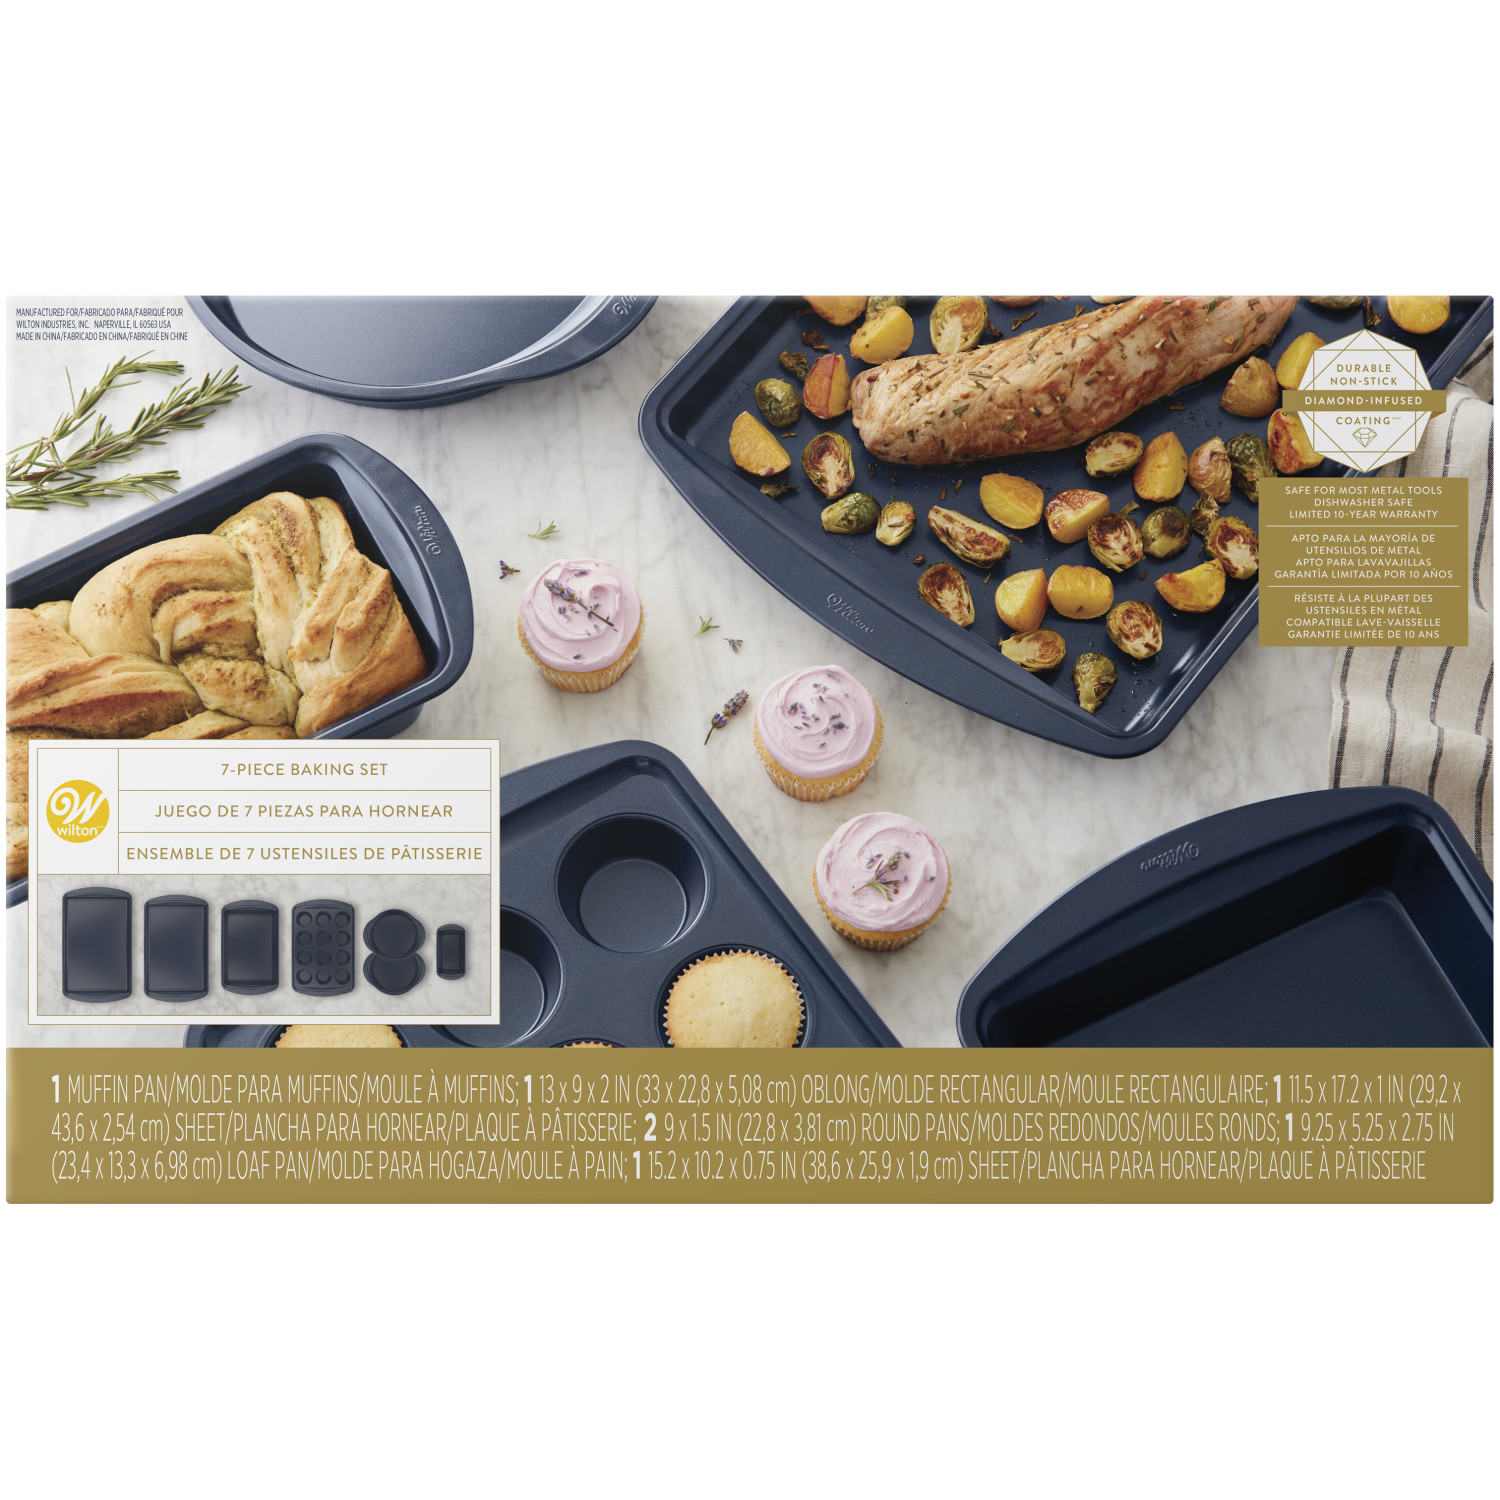 Perfect Results Muffin, Baking and Oblong Pan Bakeware Set, 3-Piece - Wilton